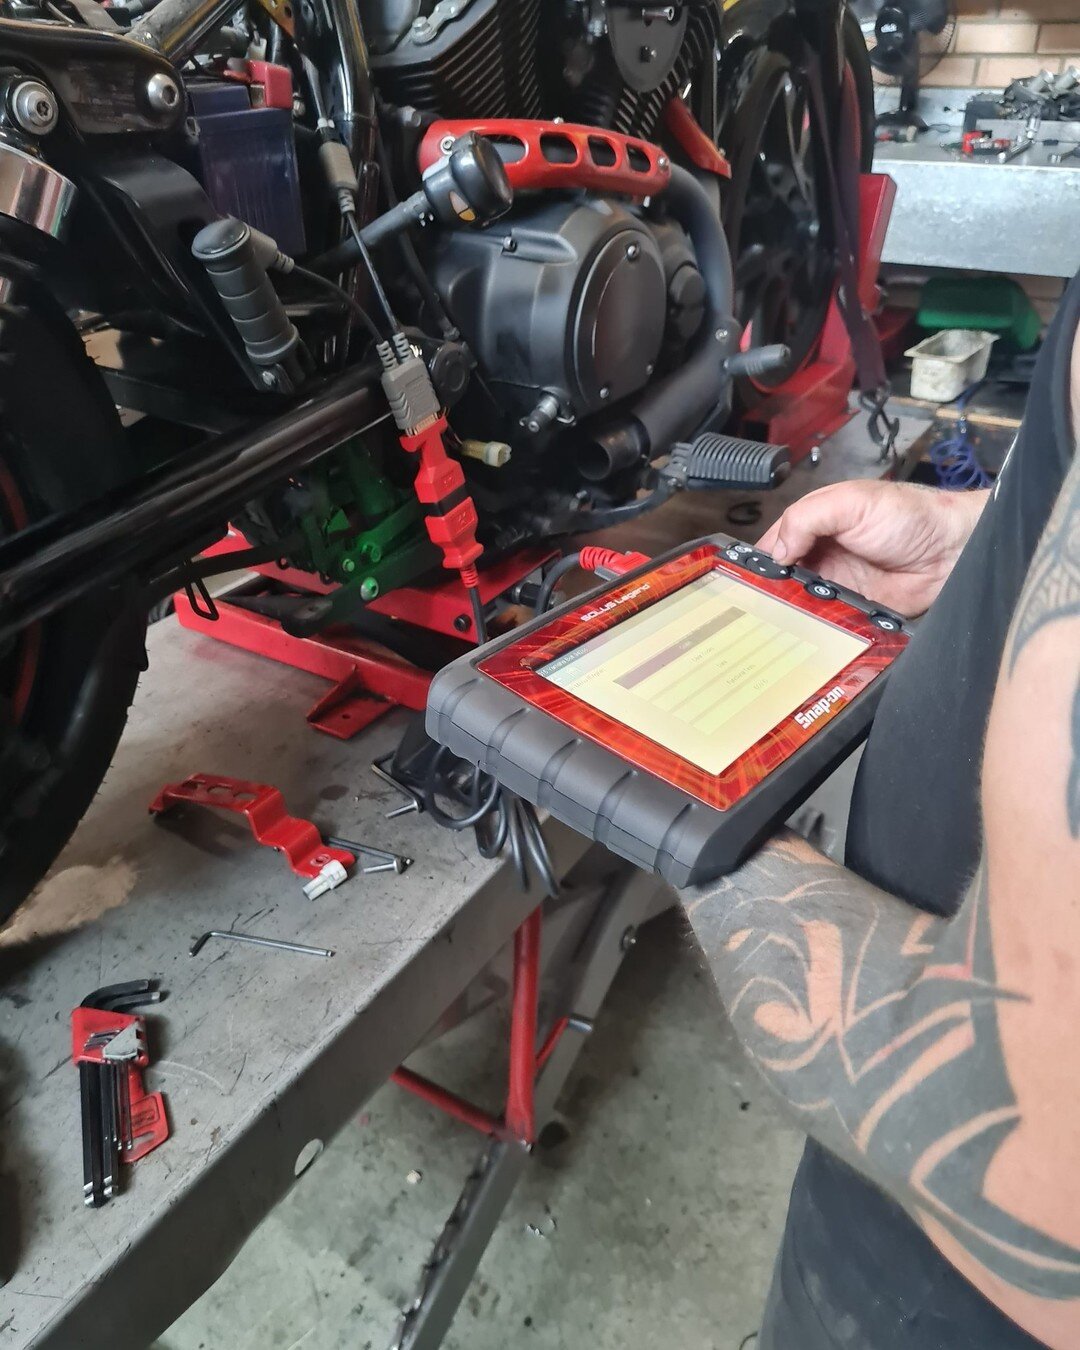 BLING BLING. We currently purchased a snap on solus edge diagnostic scan tool for motorcycles 😍 in this day and age it is becoming more and more needed. Thrive to be the best in our local area :)